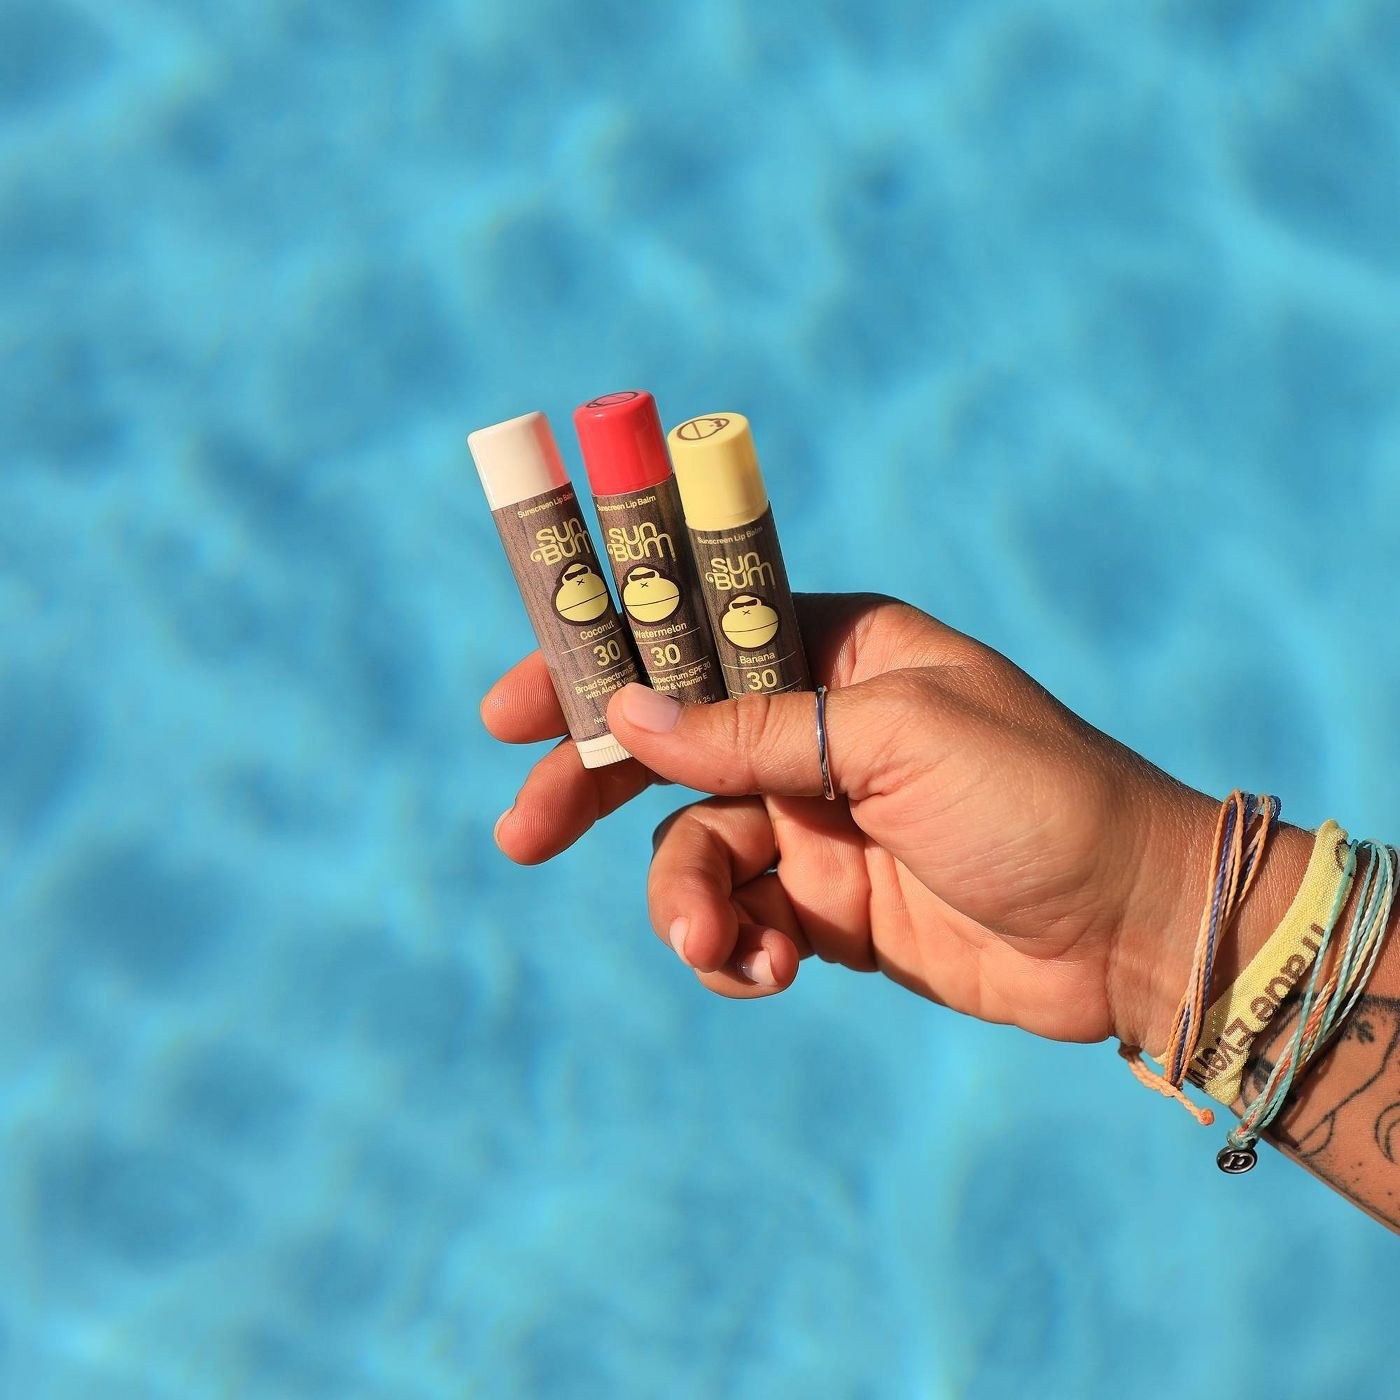 A hand holding three lip balms over a pool